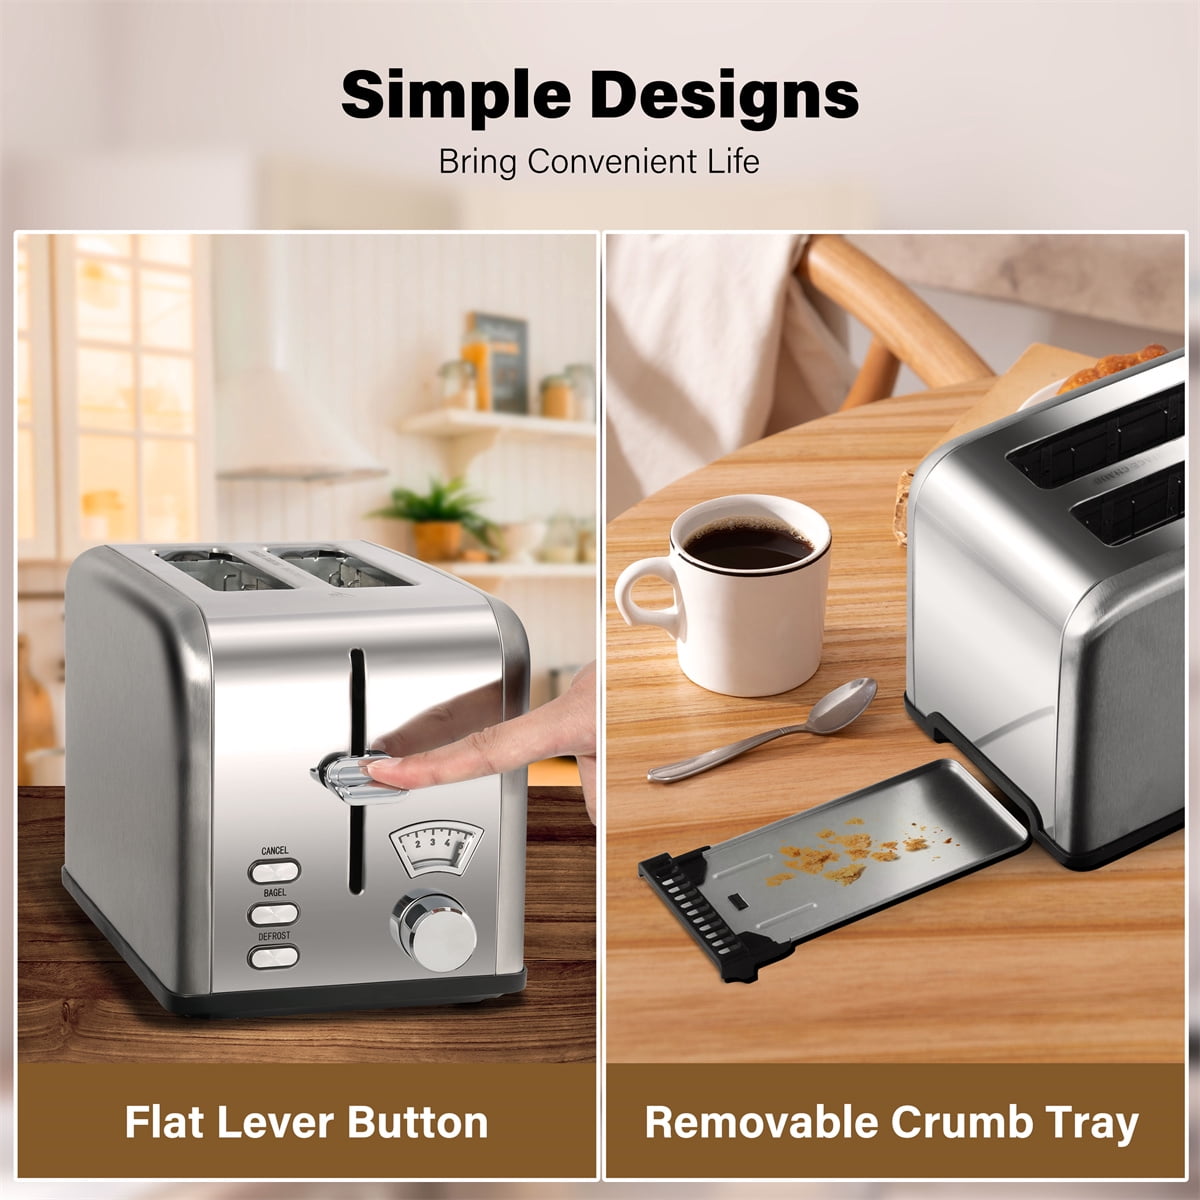 Long Slot Toaster 4 Slice Brushed Stainless Steel Toaster, 7 Toast Settings  with Bagel/Cancel/Defrost Functions, Toaster Warming Rack&Removable Tray